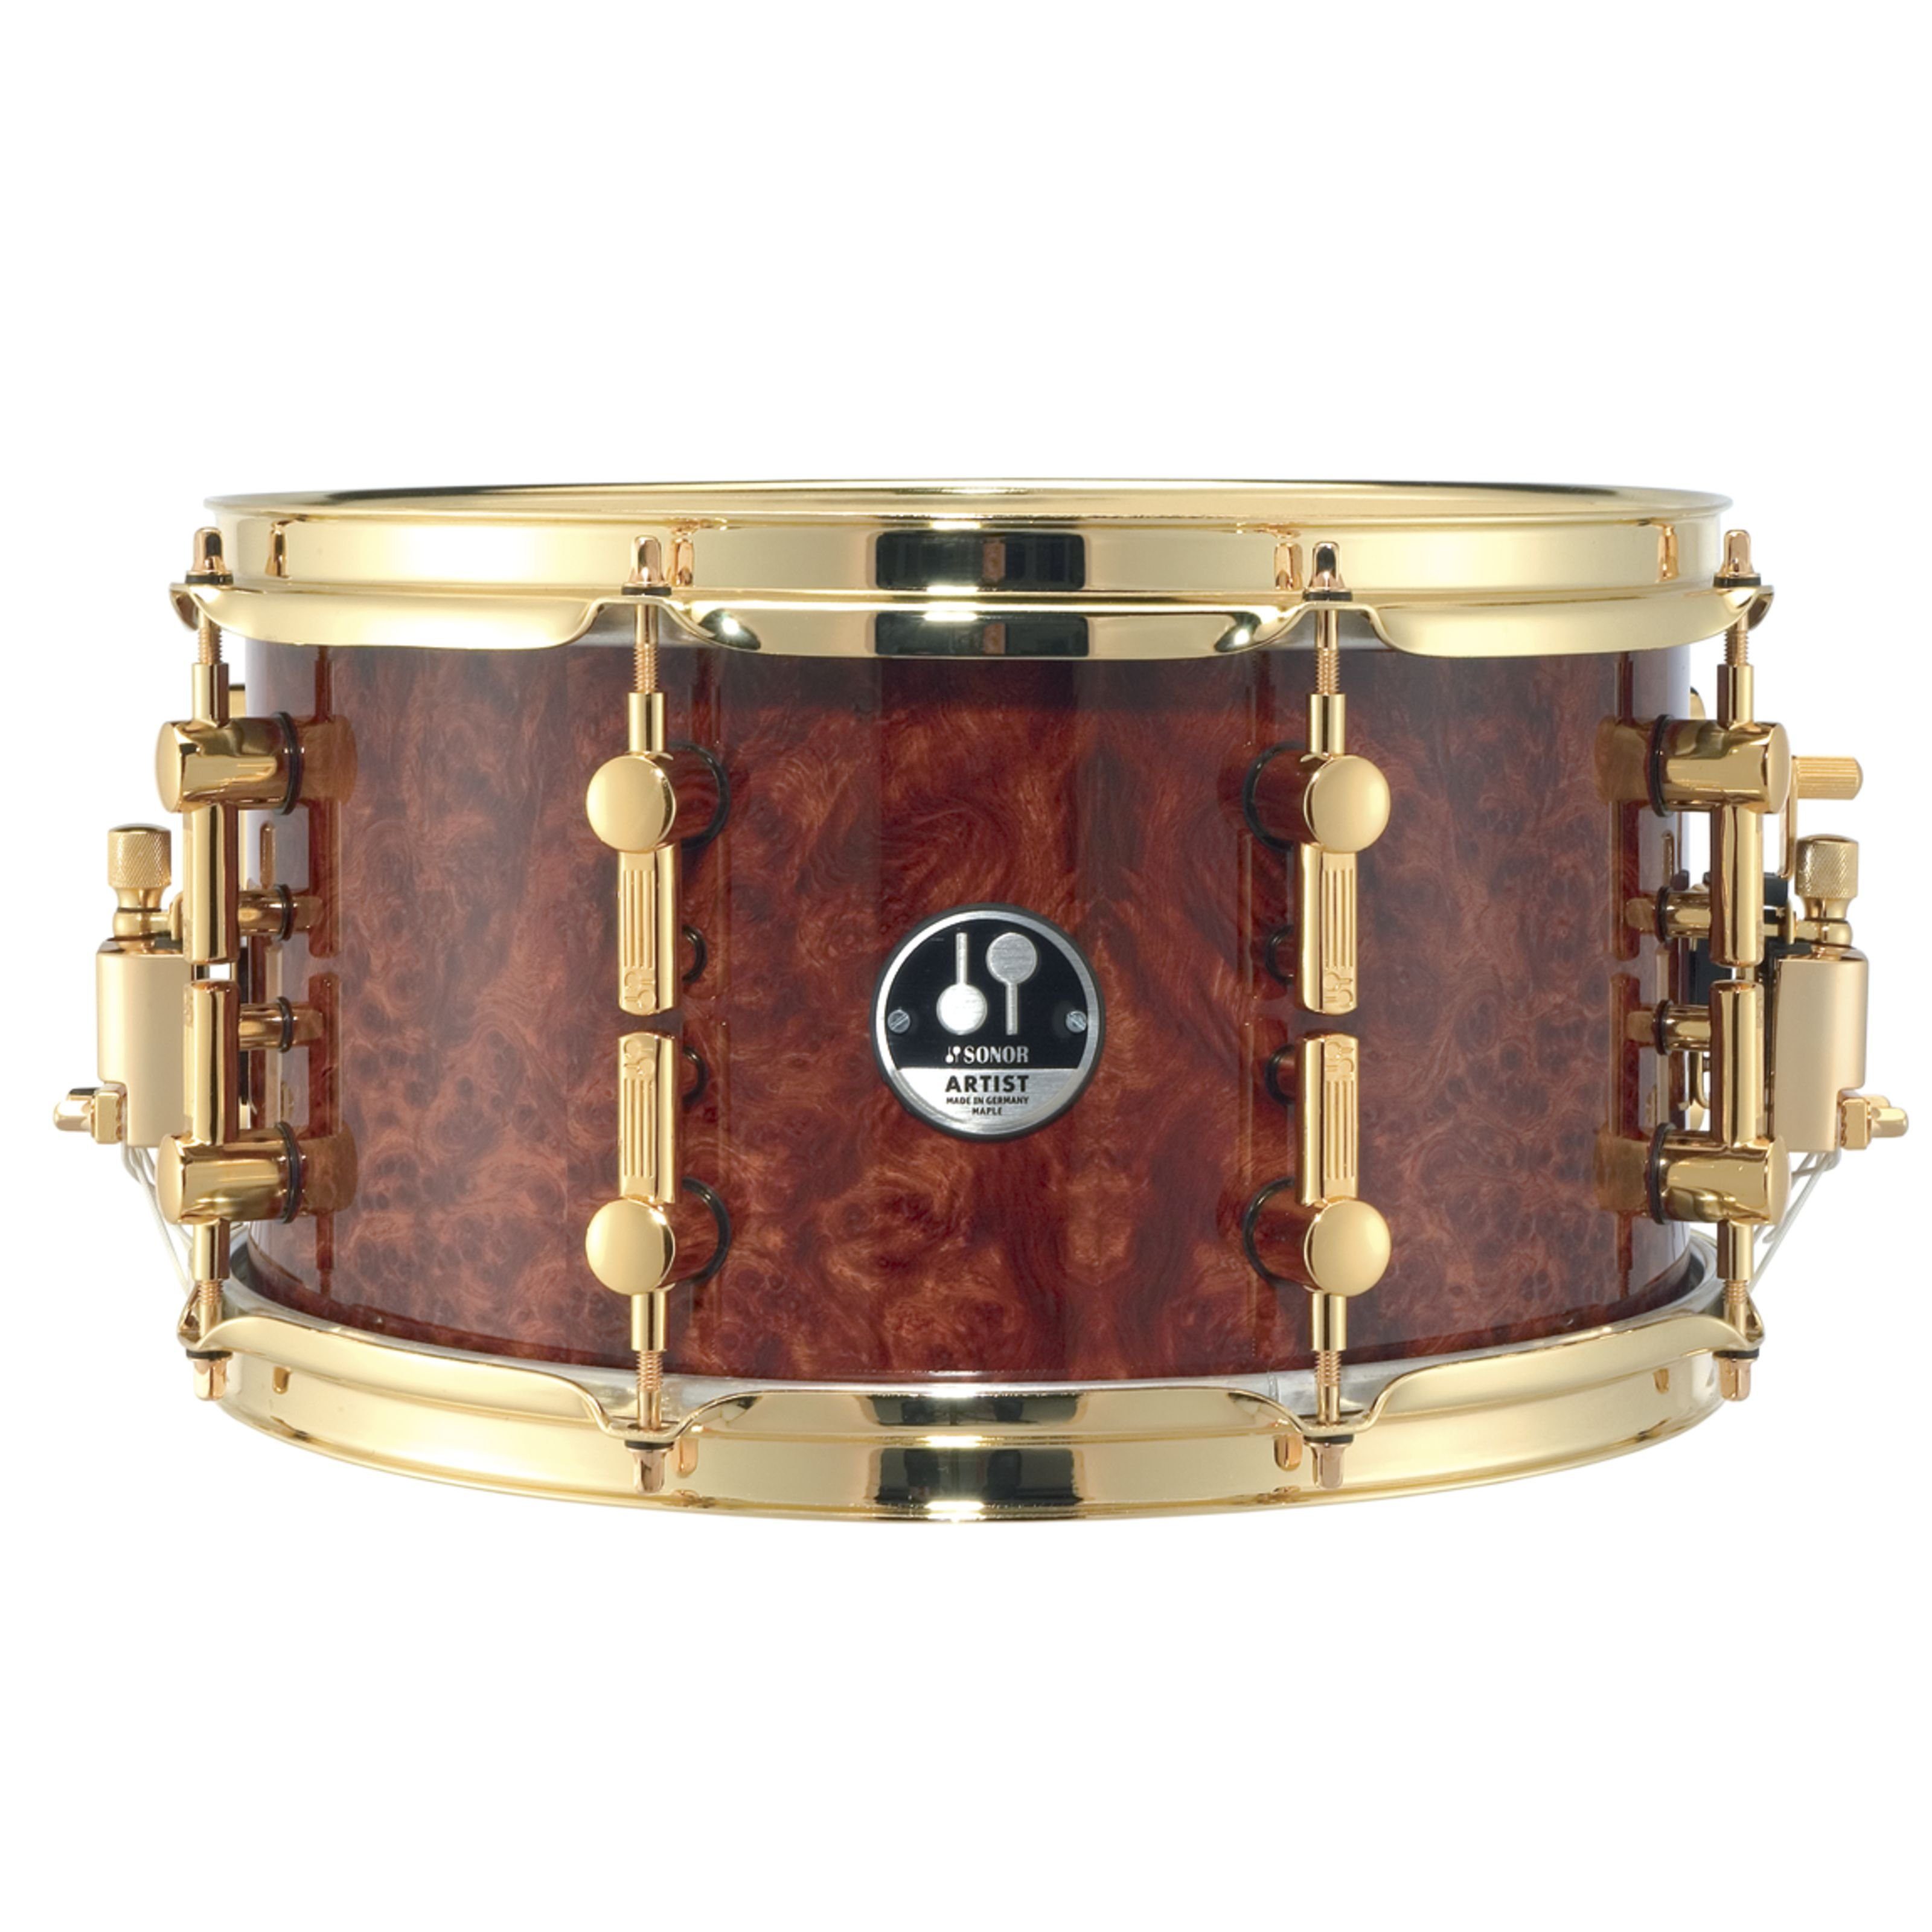 SONOR Snare Drum,AS071307AM Artist Snare 13"x7", Amboina, Schlagzeuge, Snare Drums, AS071307AM Artist Snare 13"x7", Amboina - Snare Drum